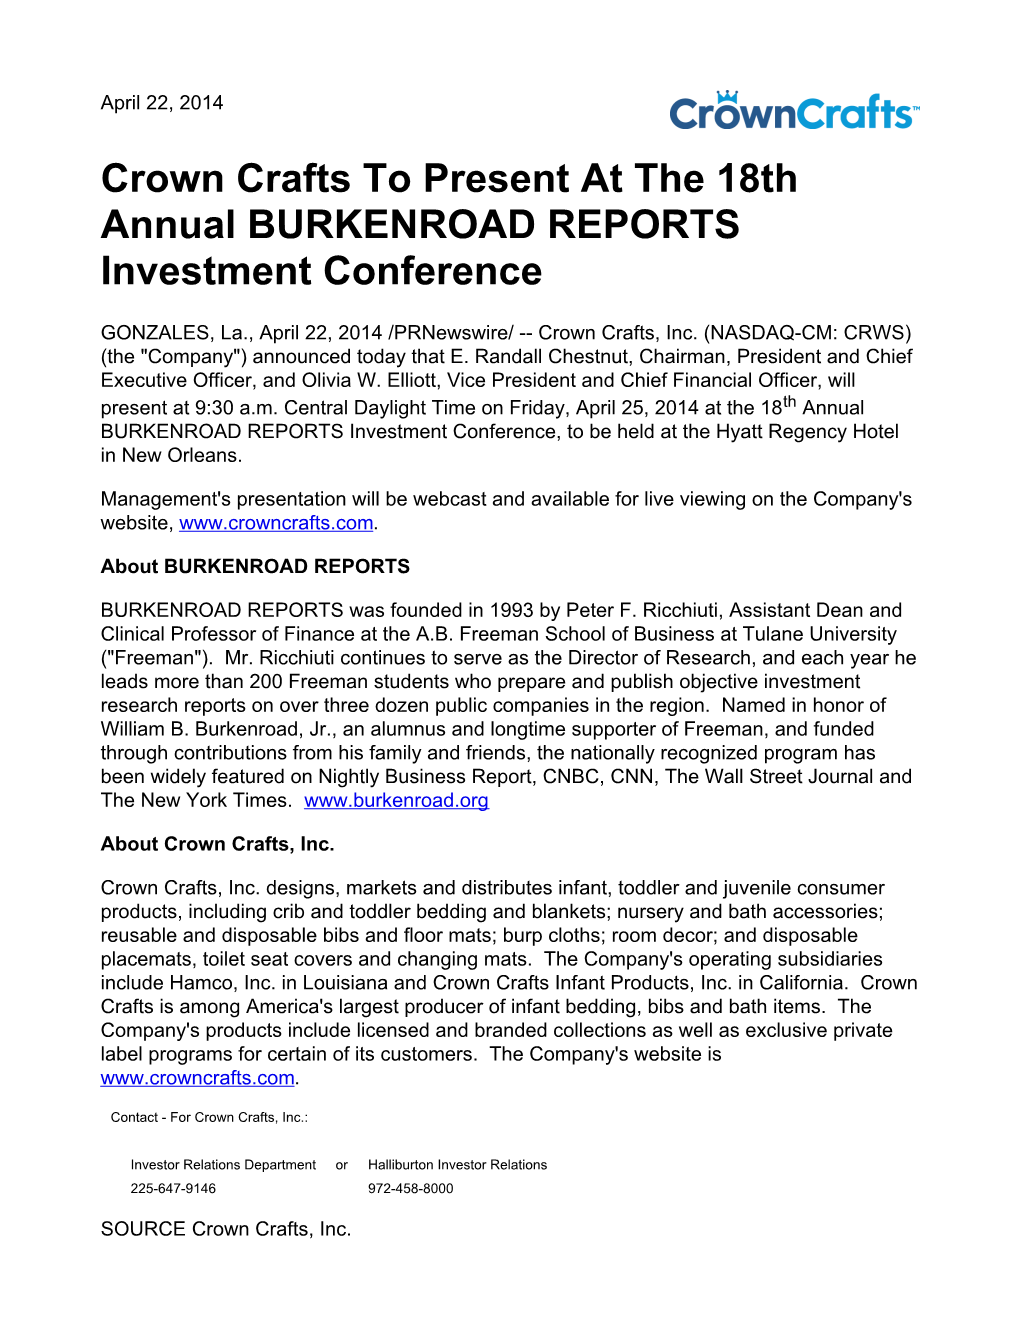 Crown Crafts to Present at the 18Th Annual BURKENROAD REPORTS Investment Conference